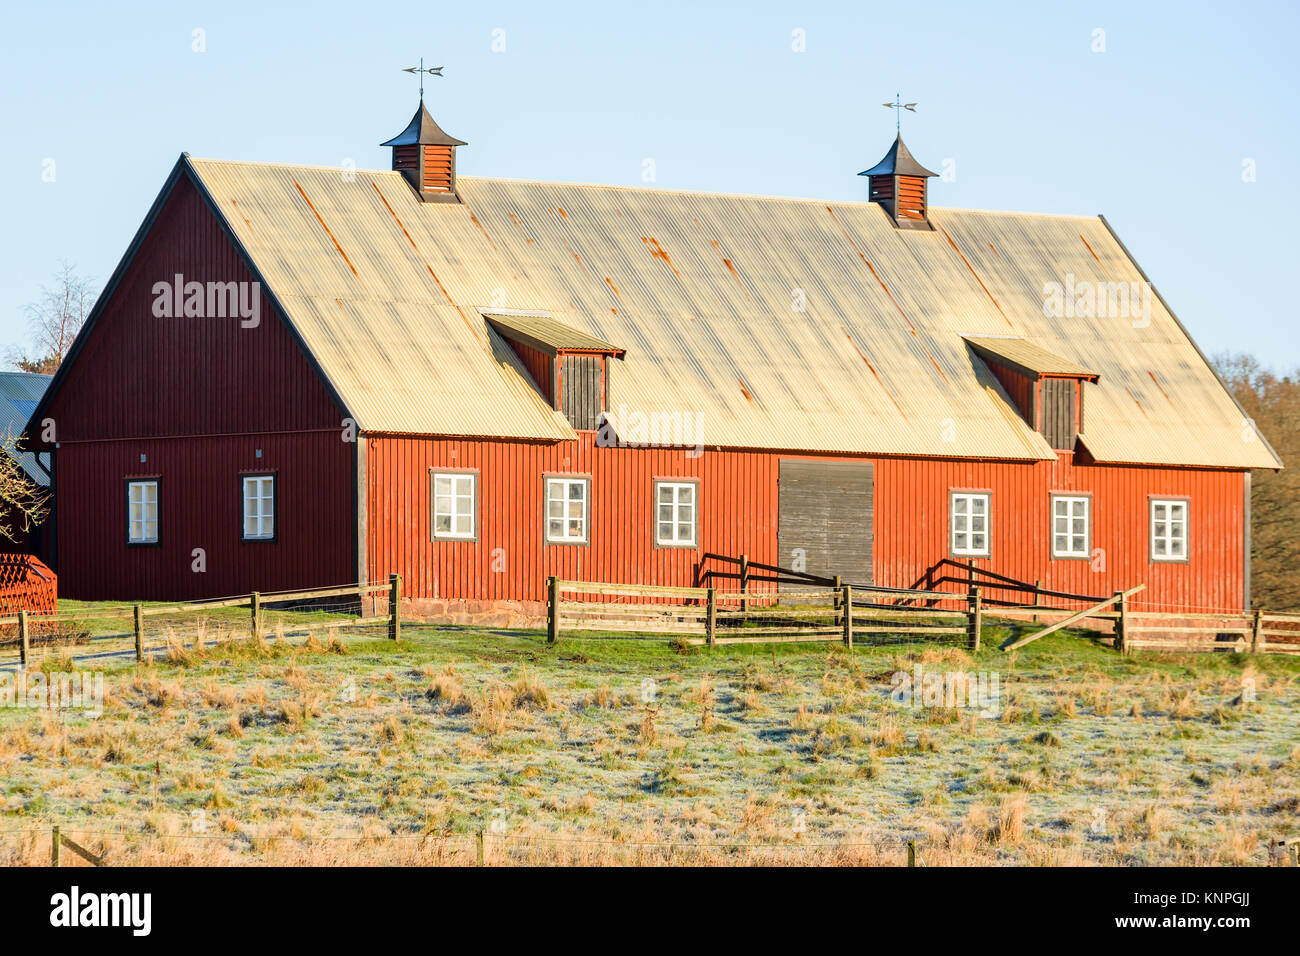 Nattraby, Sweden - November 13, 2017: Documentary of everyday life and environment. Traditional red barn with covered ventilation towers on roof. Cold Stock Photo